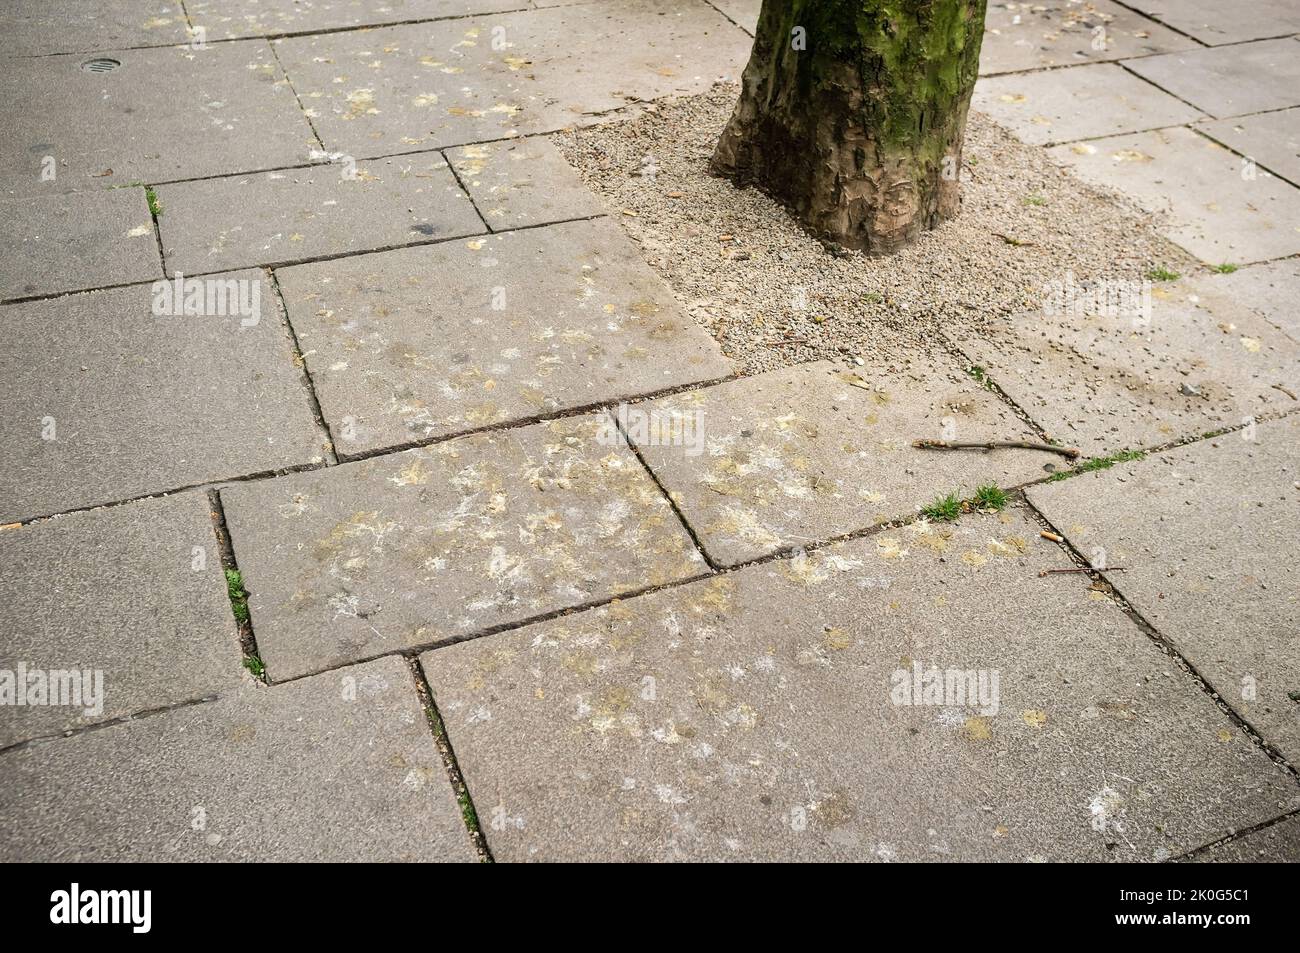 city pavement with bird droppings from seagulls Stock Photo